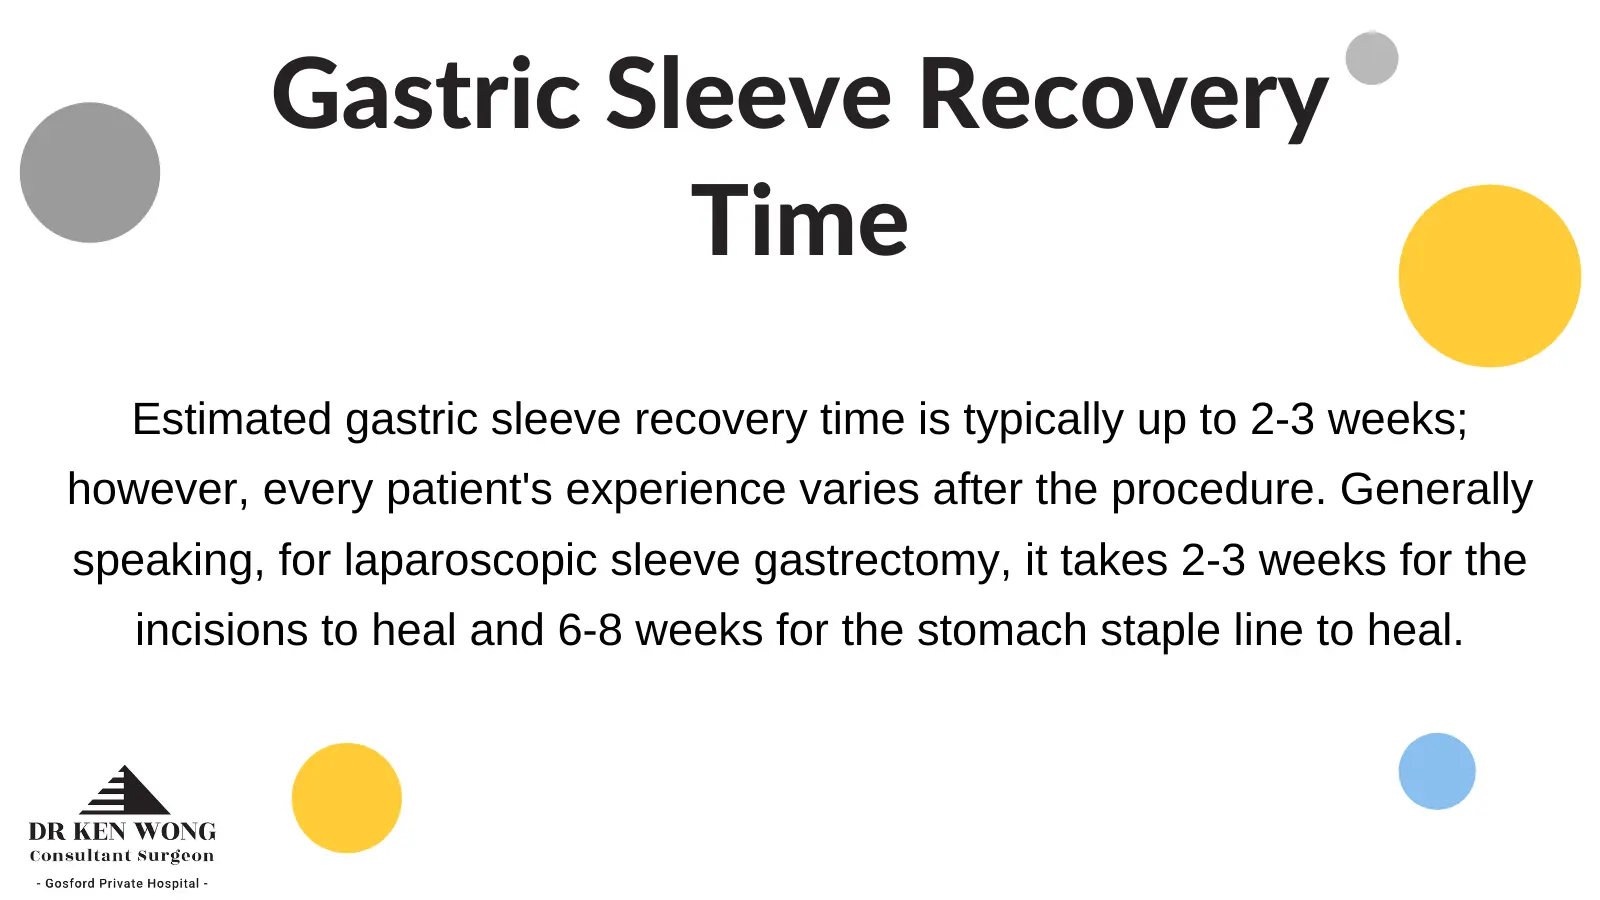 Gastric Sleeve Recovery Time Infographic